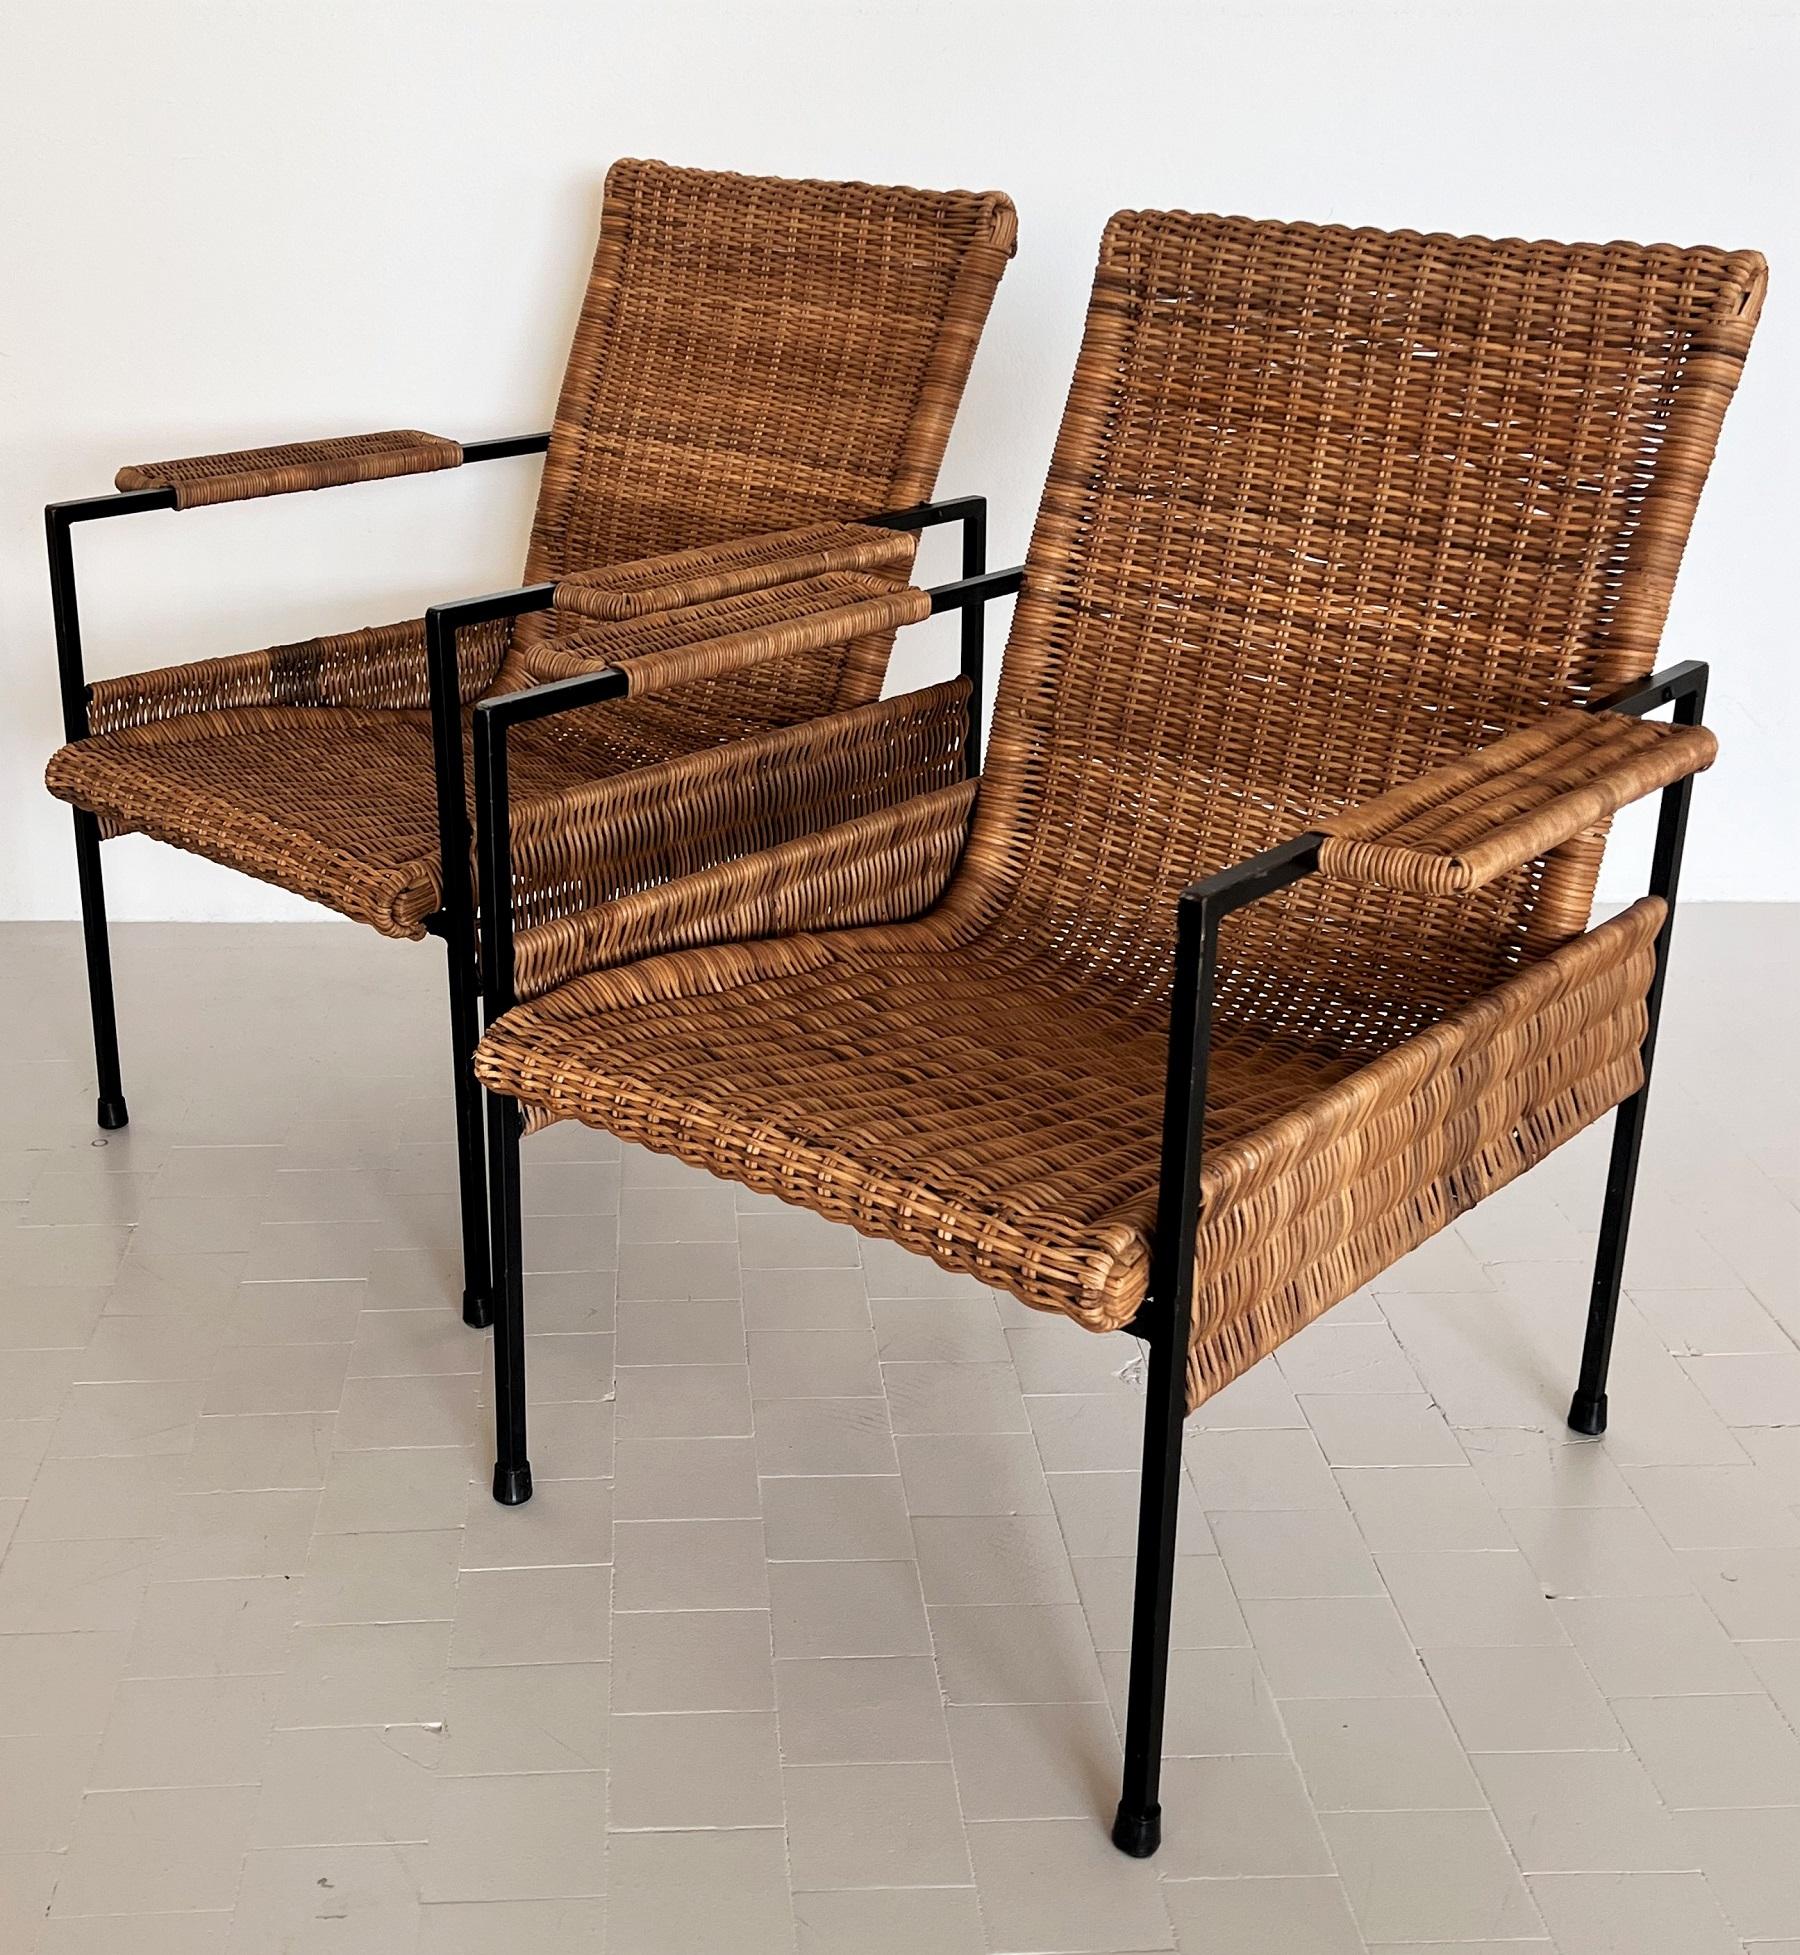 Italian Comfortable Midcentury Rattan Wicker and Iron Lounge Chairs, set of 4 For Sale 1